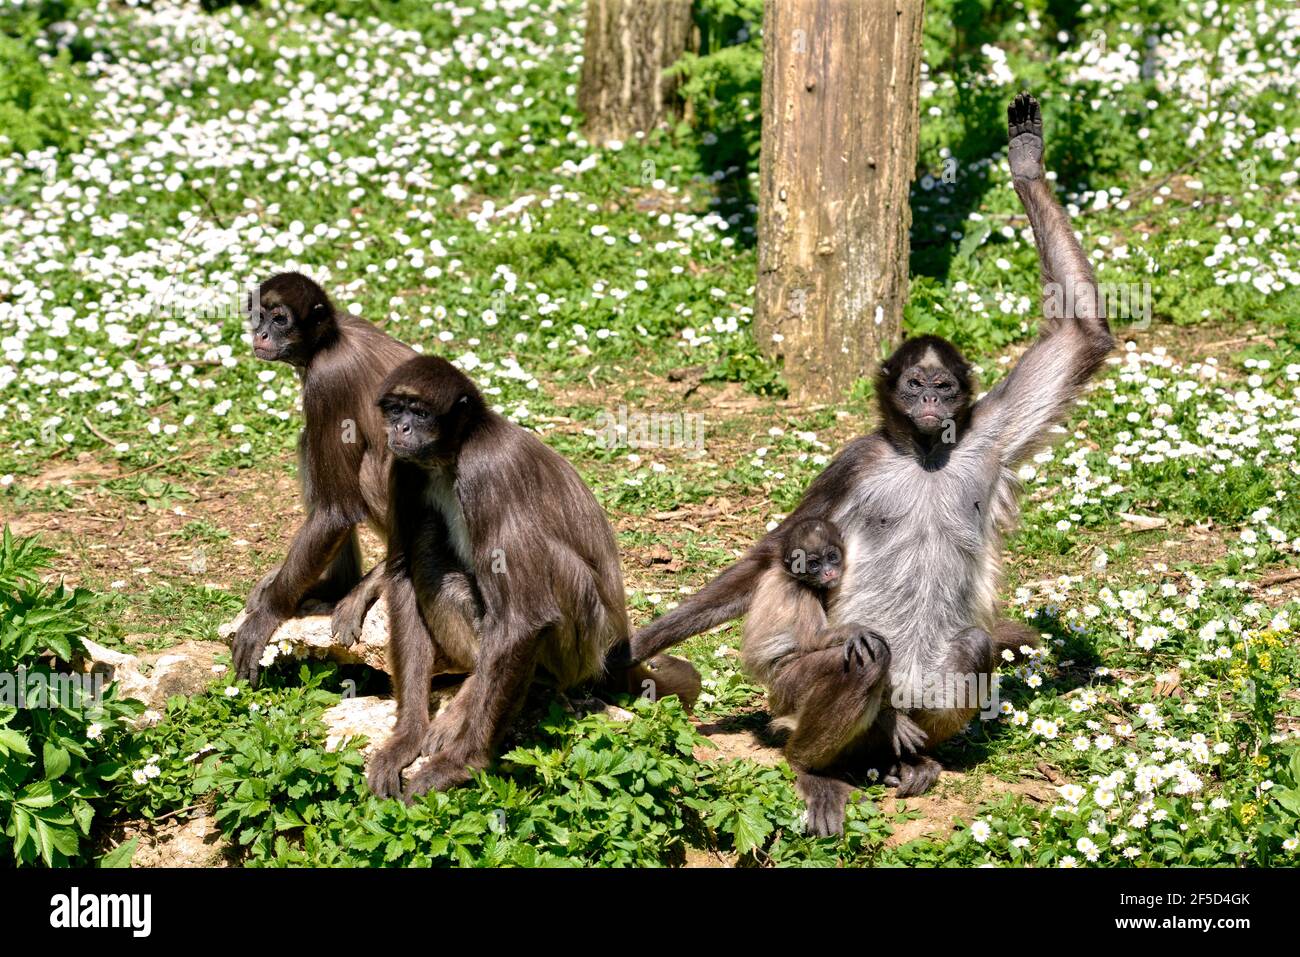 Variegated spider monkeys (Ateles hybridus marimonda) sitting on grass with daisy flowers with a cub Stock Photo